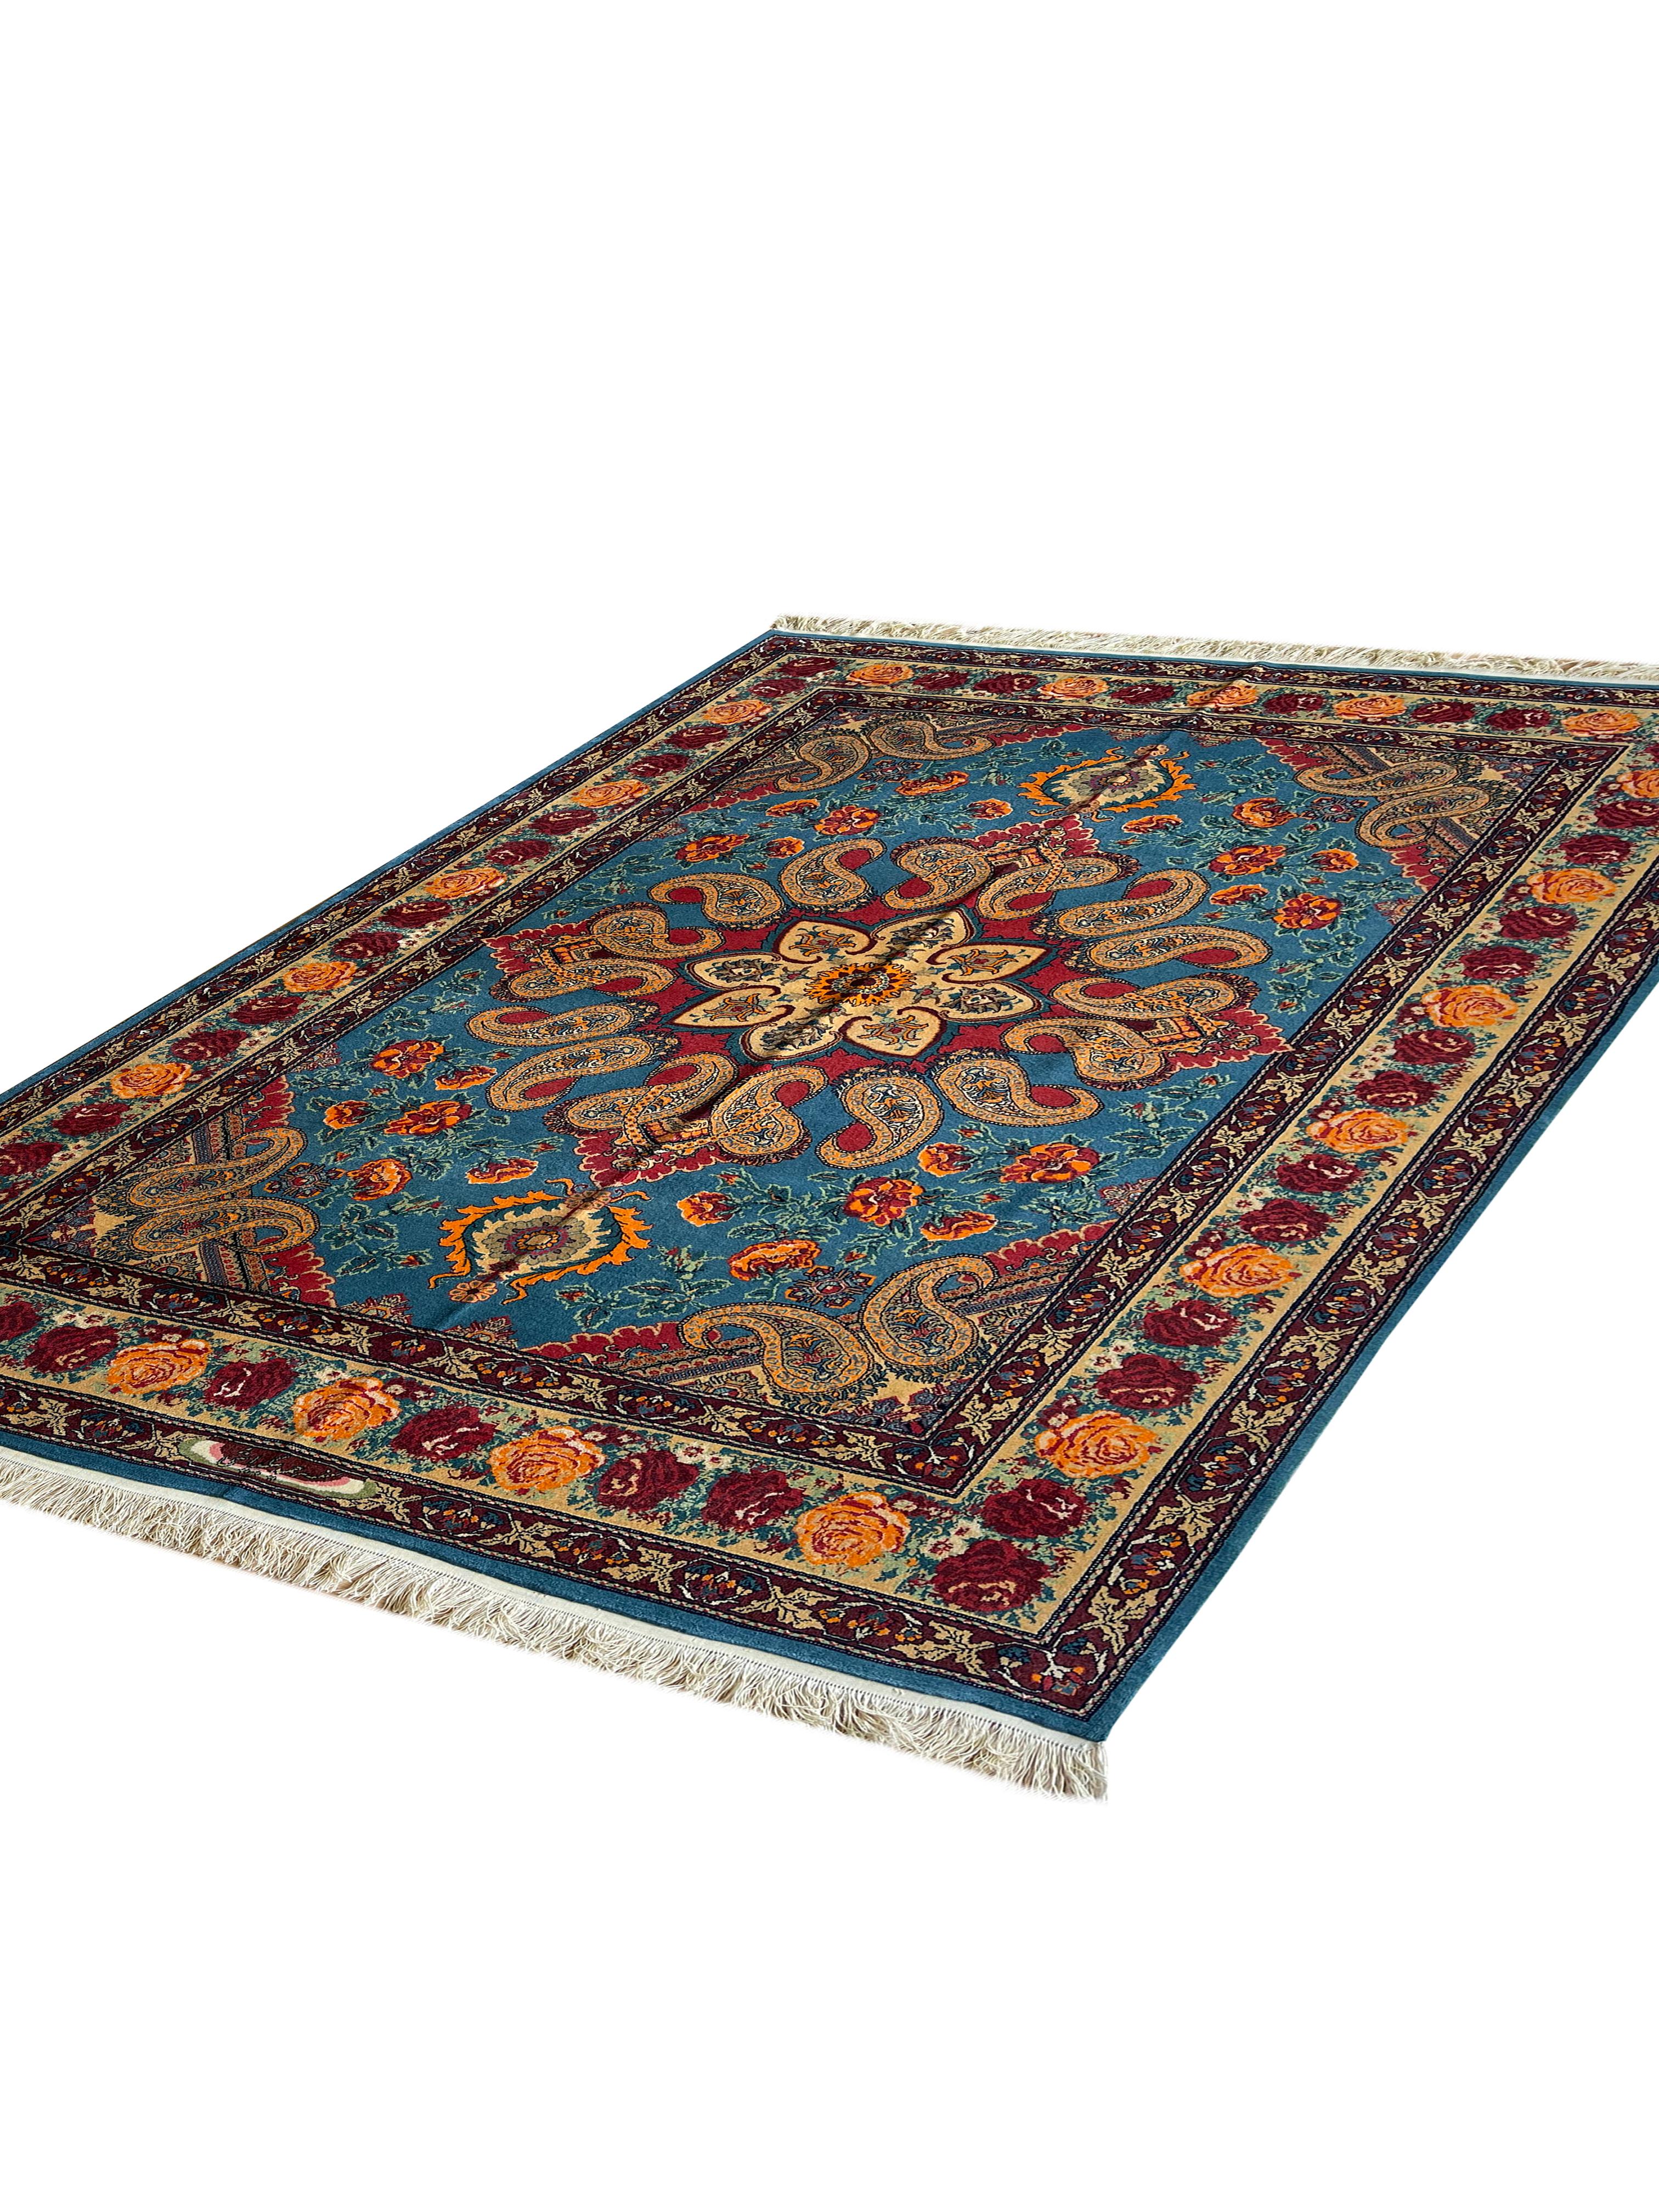 Exclusive magnificent handmade rug made of high-quality materials and designed from a very high-end rug workshop.
The background of this floral rug shows this glittery blue rug as very vivid and shiny. 
The design of this rug includes naturally